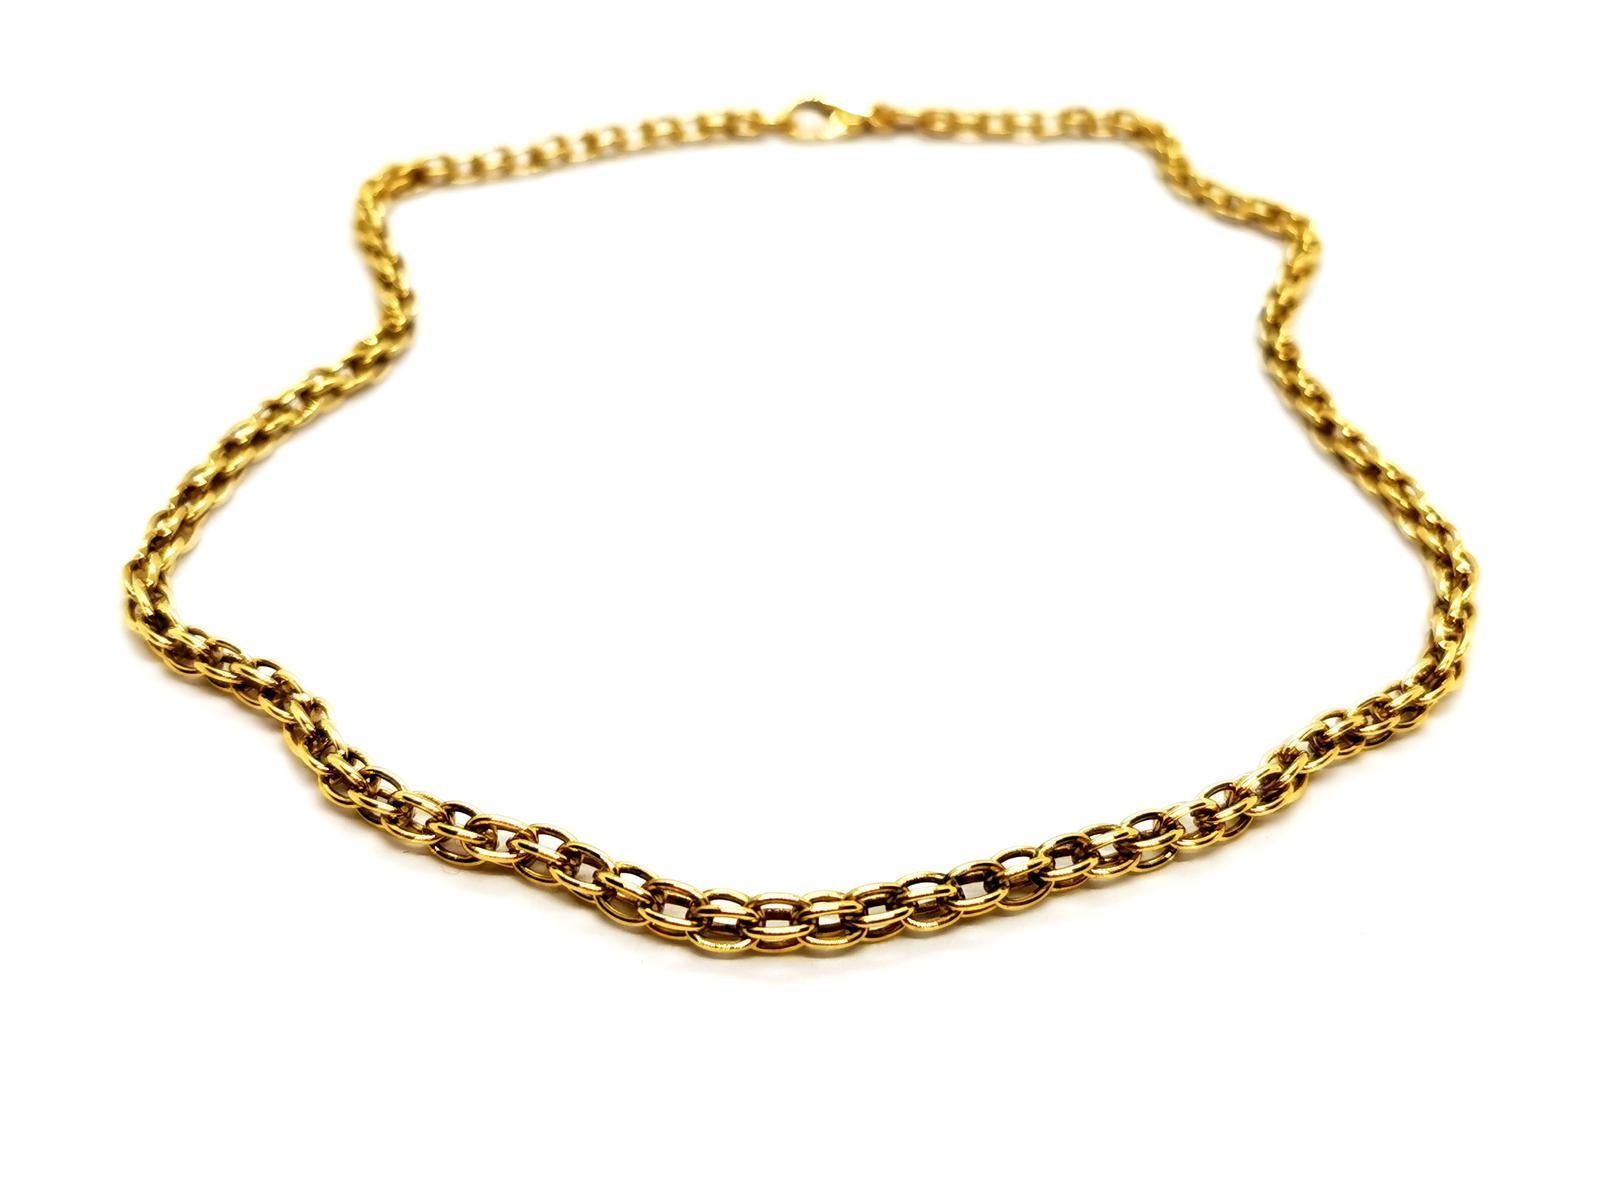 Necklace in 750 thousandths yellow gold (18 carats). quadruple oval link. length: 44 cm. width: 0.41 cm. total weight: 28.08 g. Owl hallmark. excellent condition.
